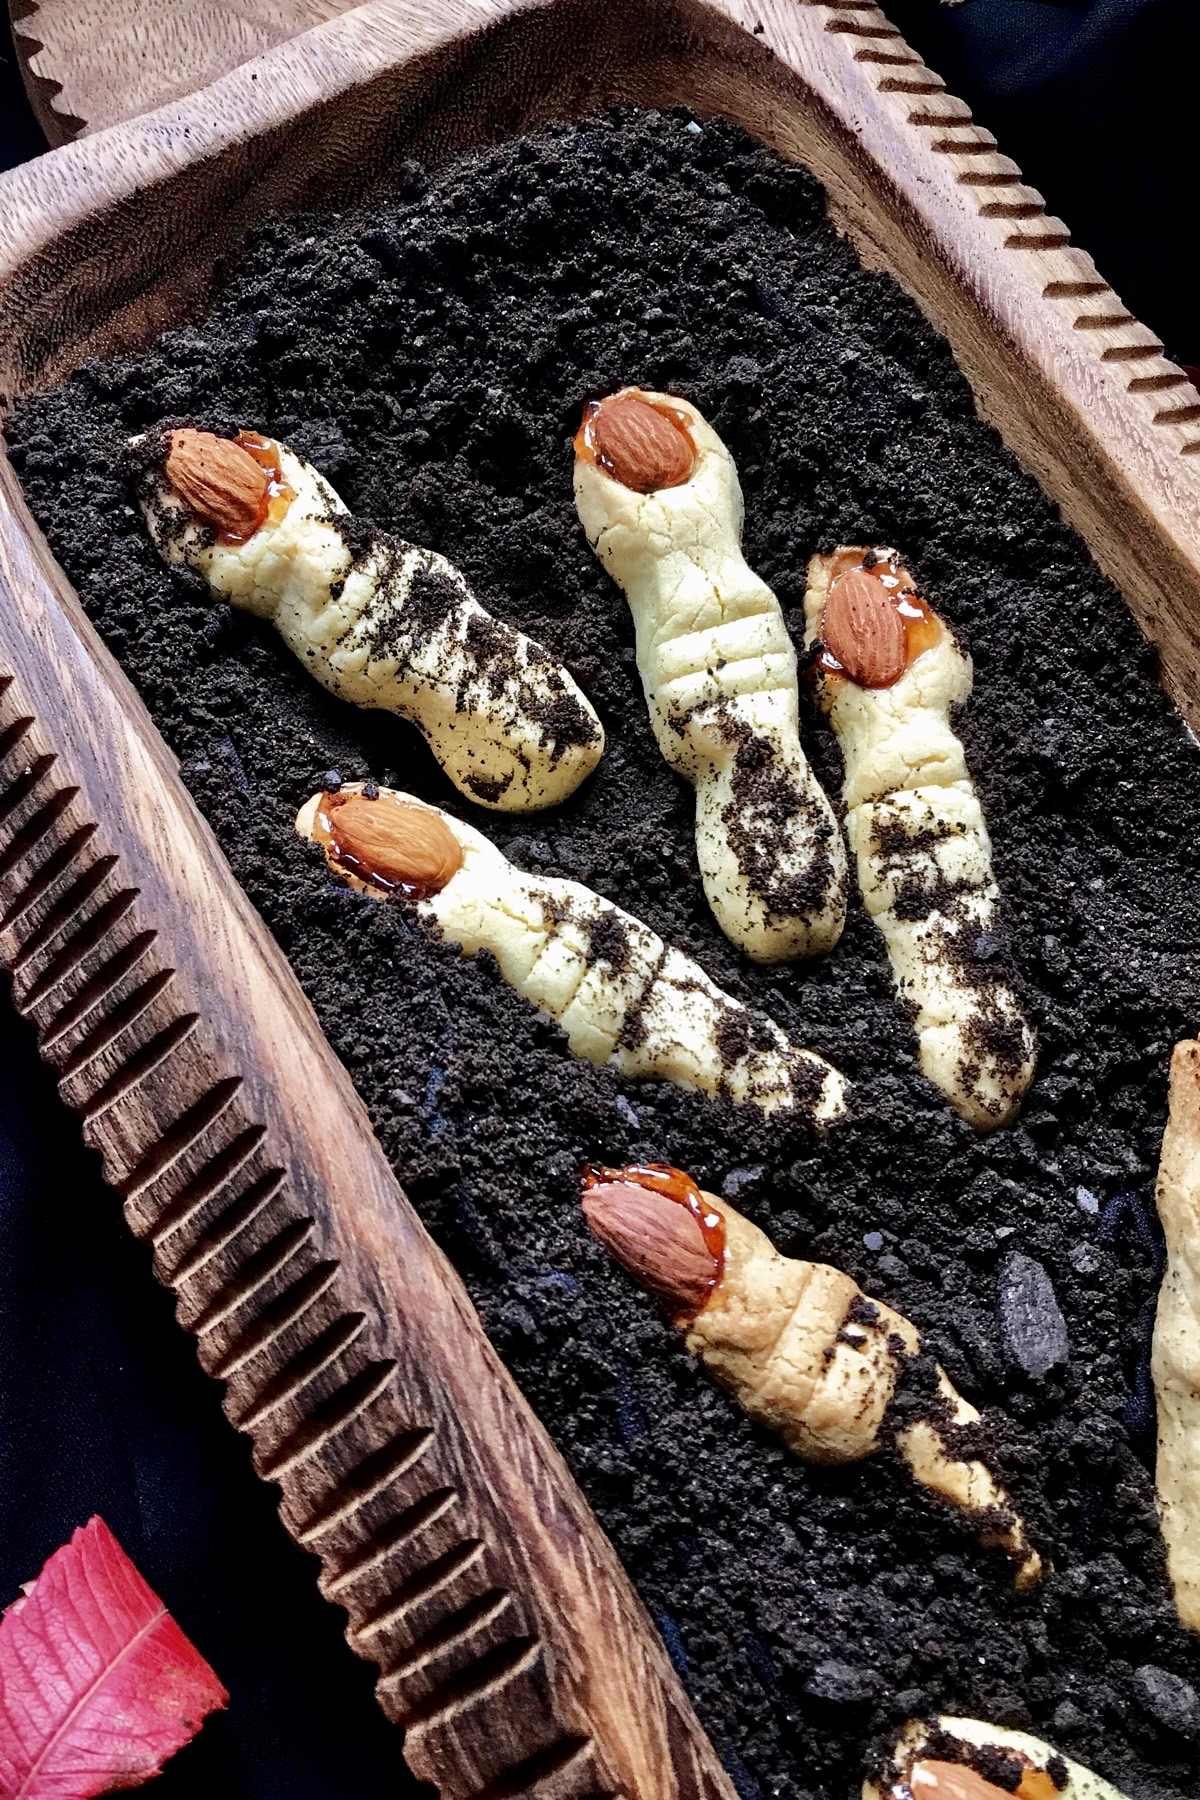 Witch fingers are placed on crushed graham chocolate cookies to resemble dirt.